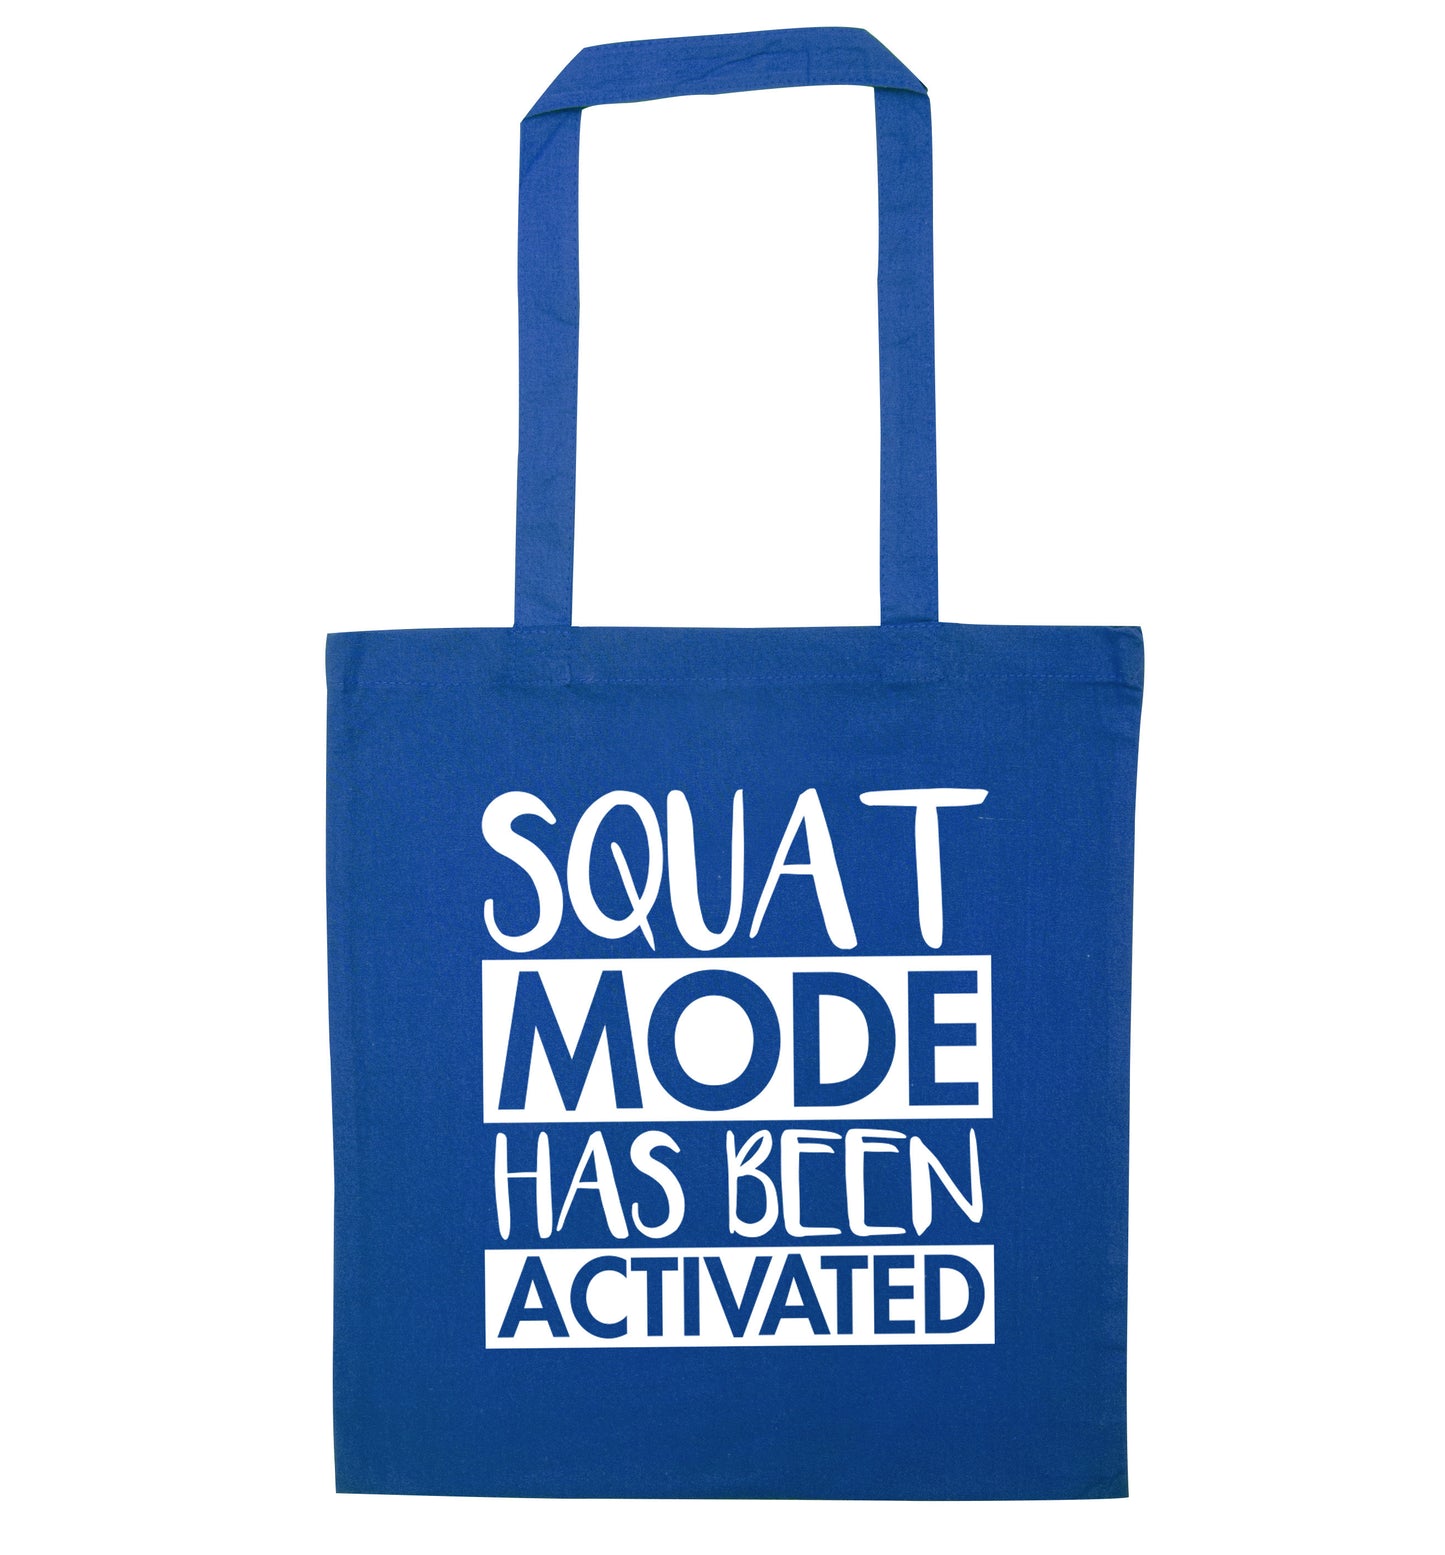 Squat mode activated blue tote bag